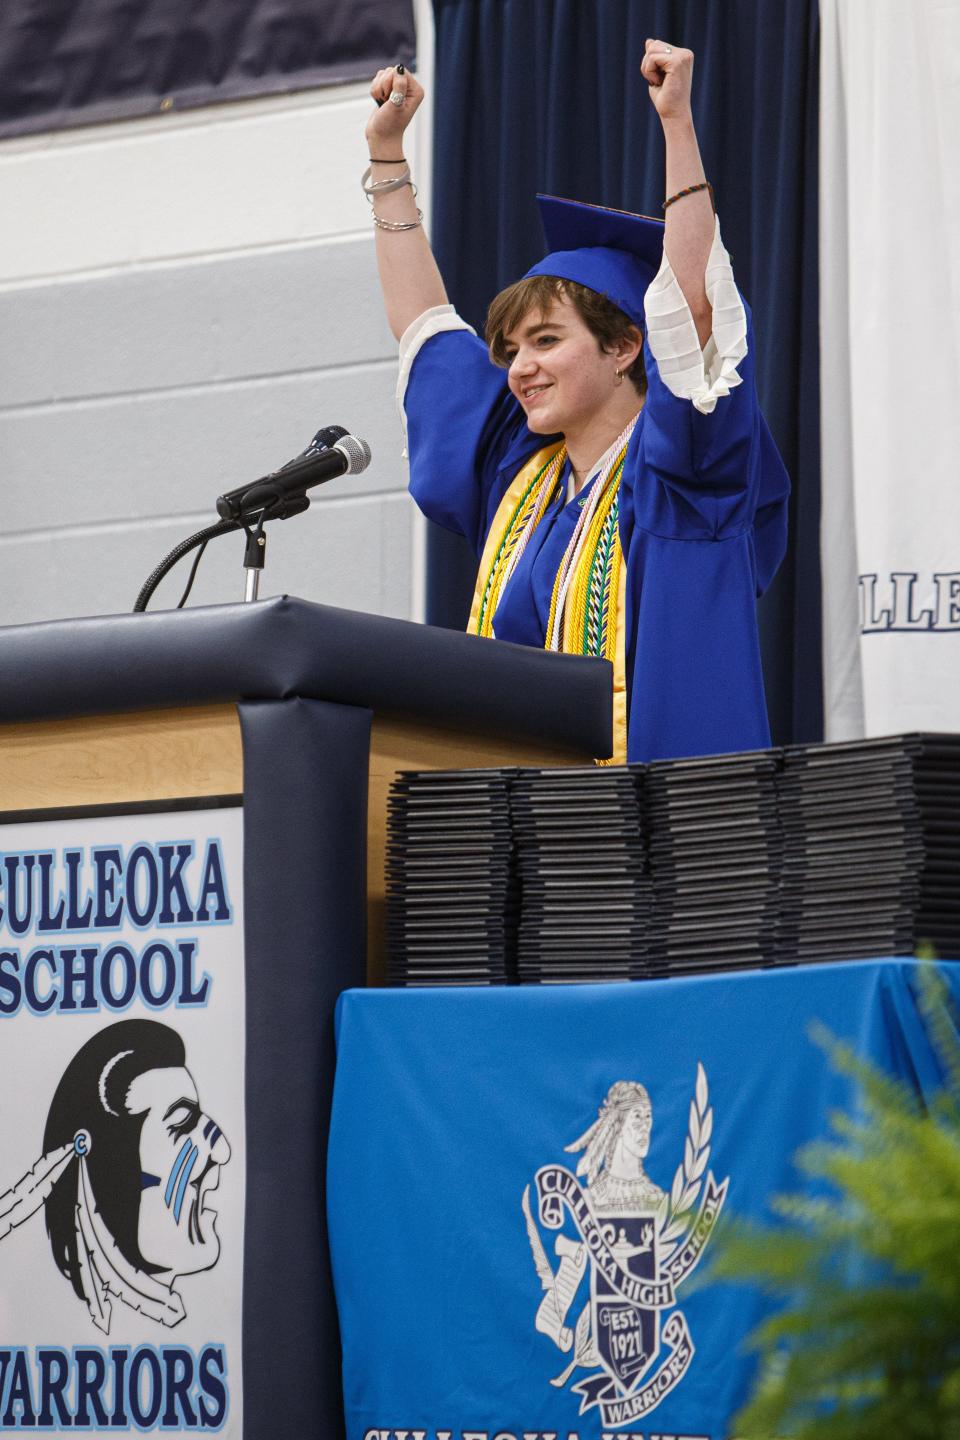 Valedictorian Calleway Schmidt throws his arms in the air in celebration during his commencement speech at the Culleoka Unit School graduation ceremony at the gymnasium in Culleoka, Tenn. on May 18, 2023.